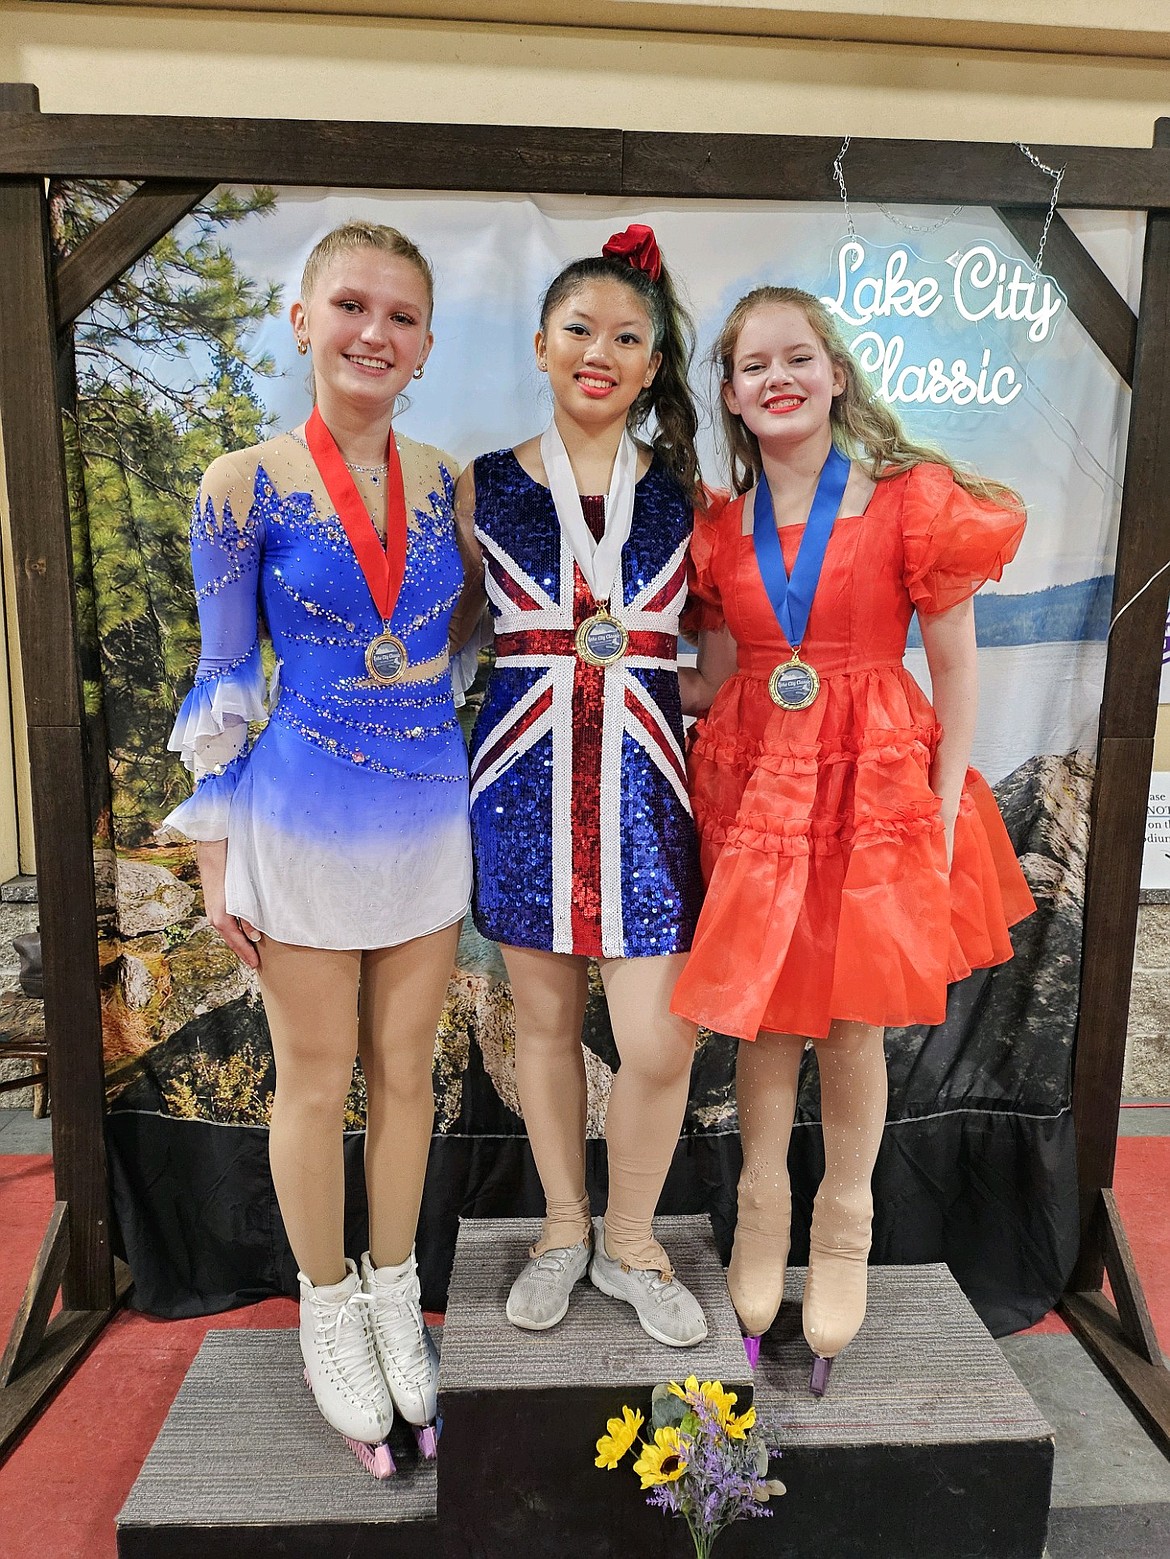 Courtesy photo 
From left, Savannah Mortimer, Kilee Williams and Evelyn Parker, part of the Lake City Figure Skating program of the Spokane Figure Skating Club, which hosted the Lake City Classic on May 17-19 at the Frontier Ice Arena in Coeur d'Alene.